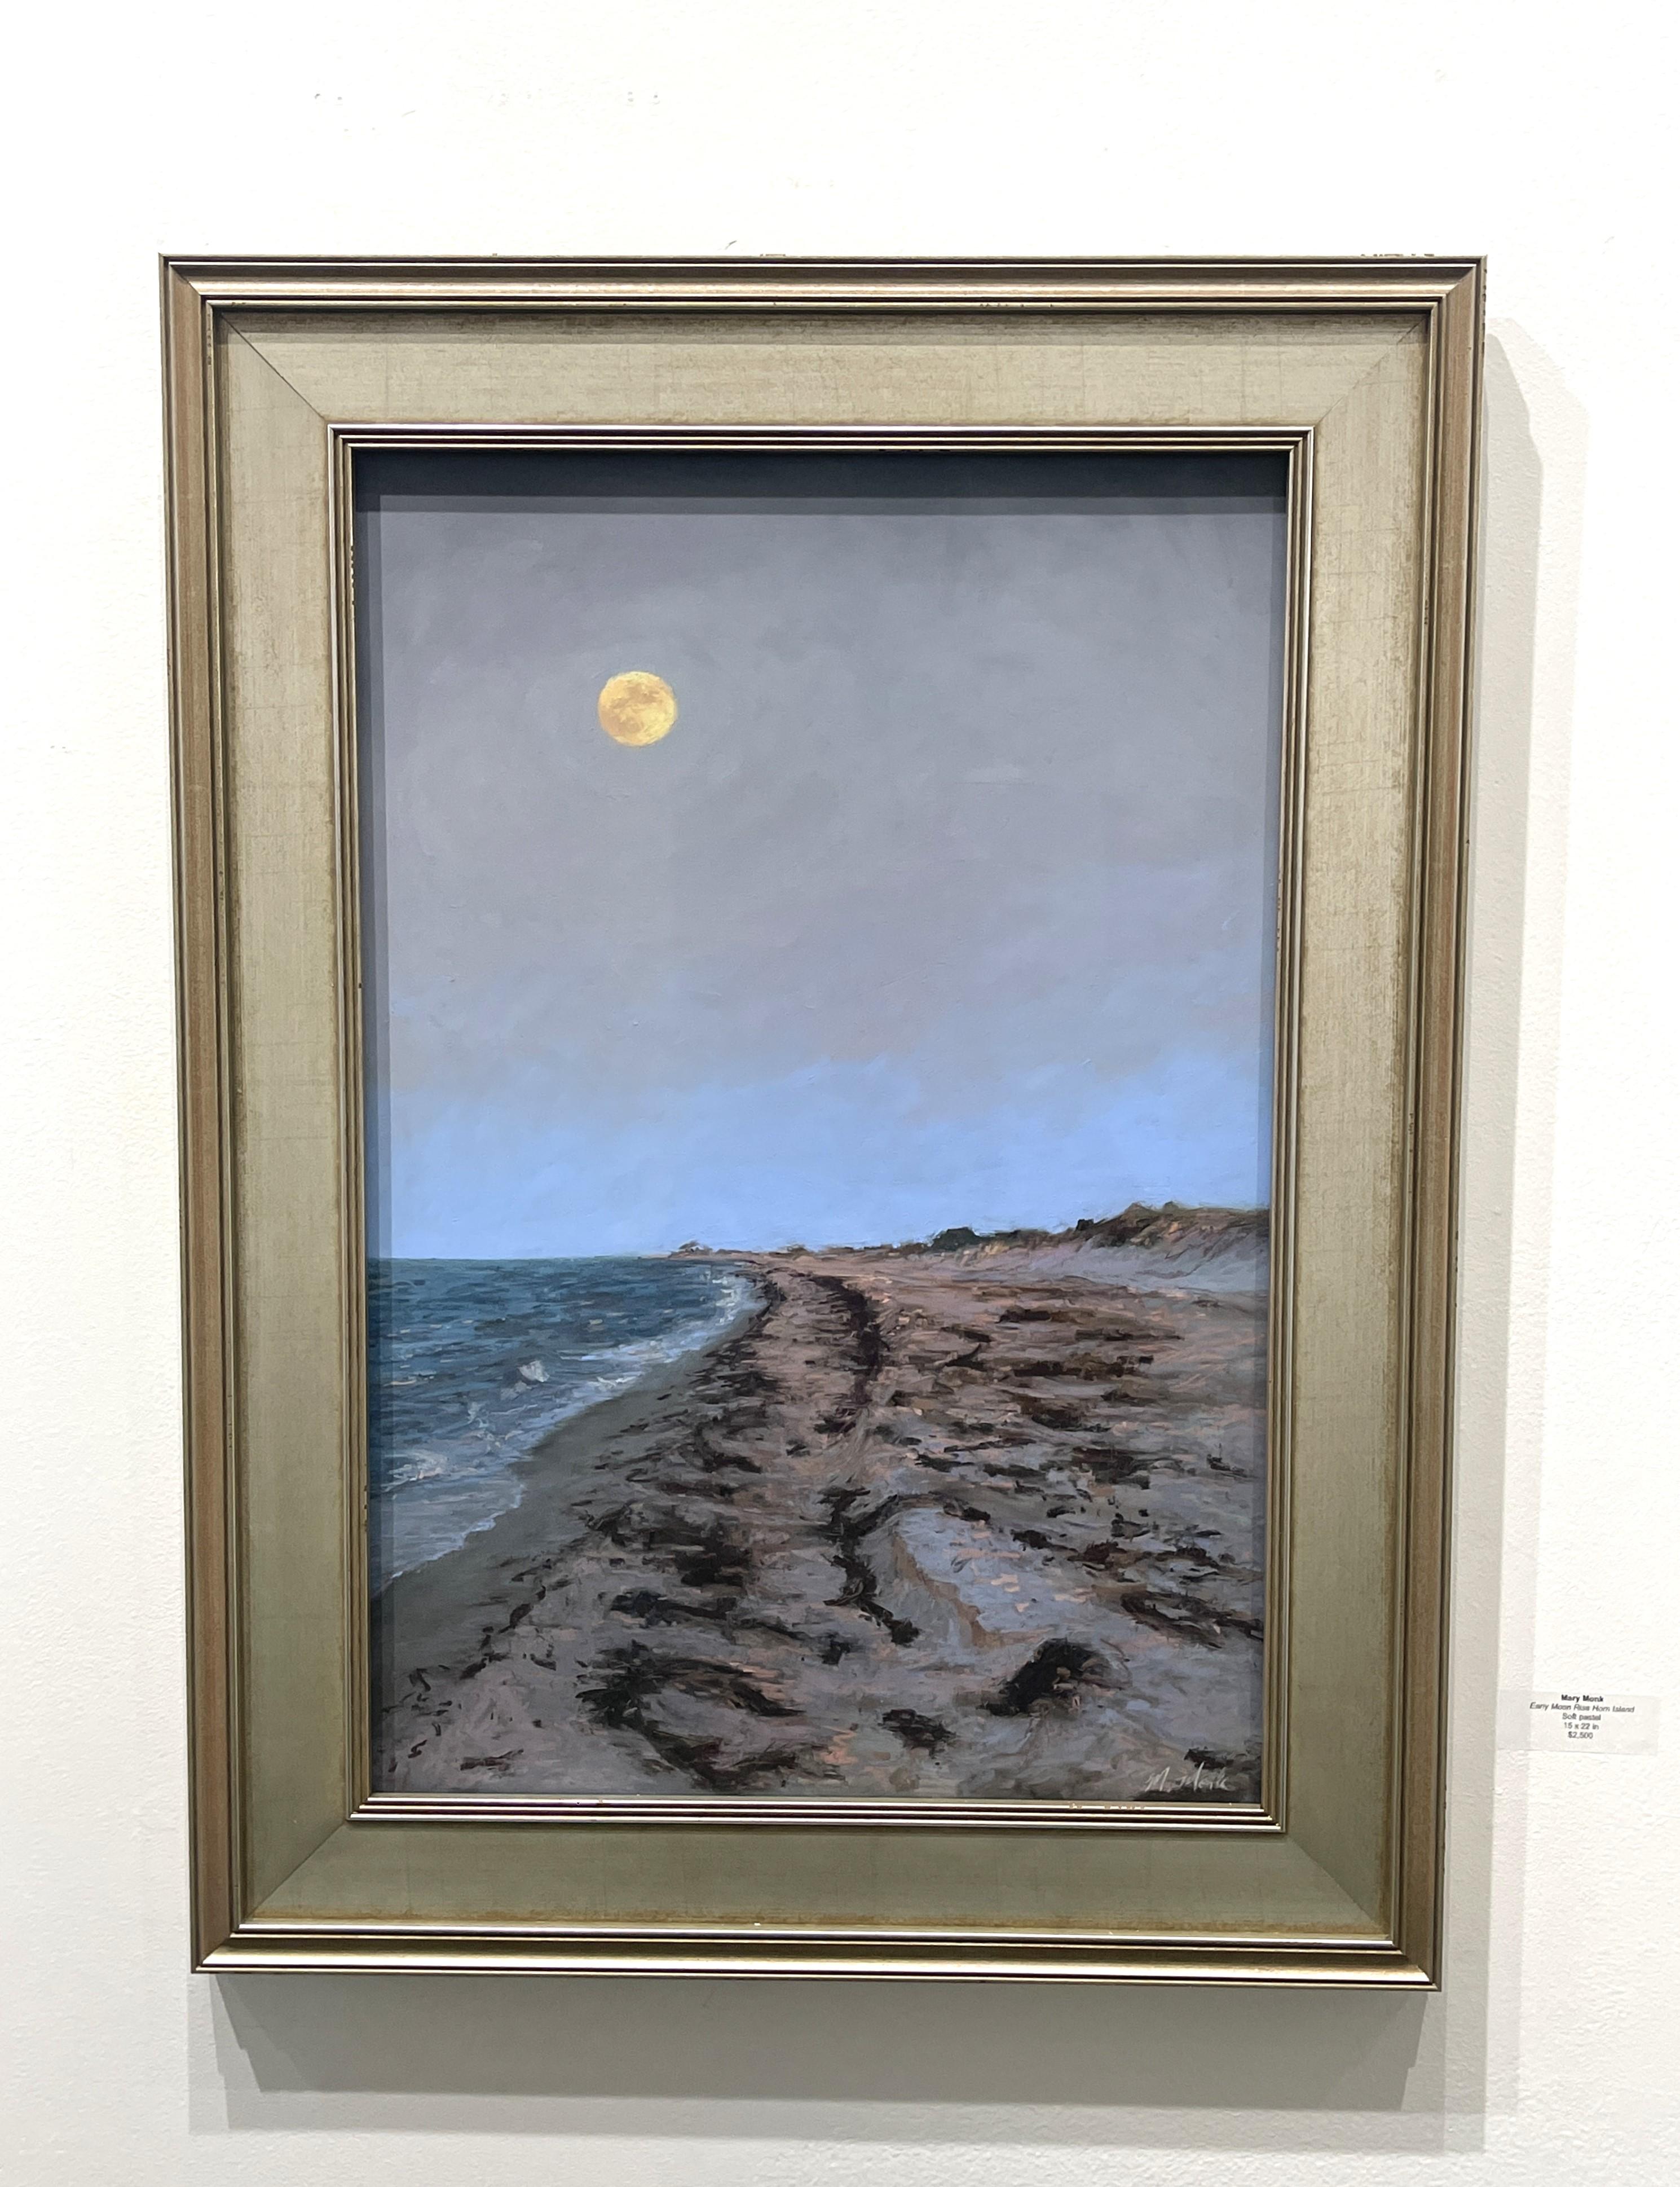 Early Moon Rise Horn Island - Painting by Mary Monk